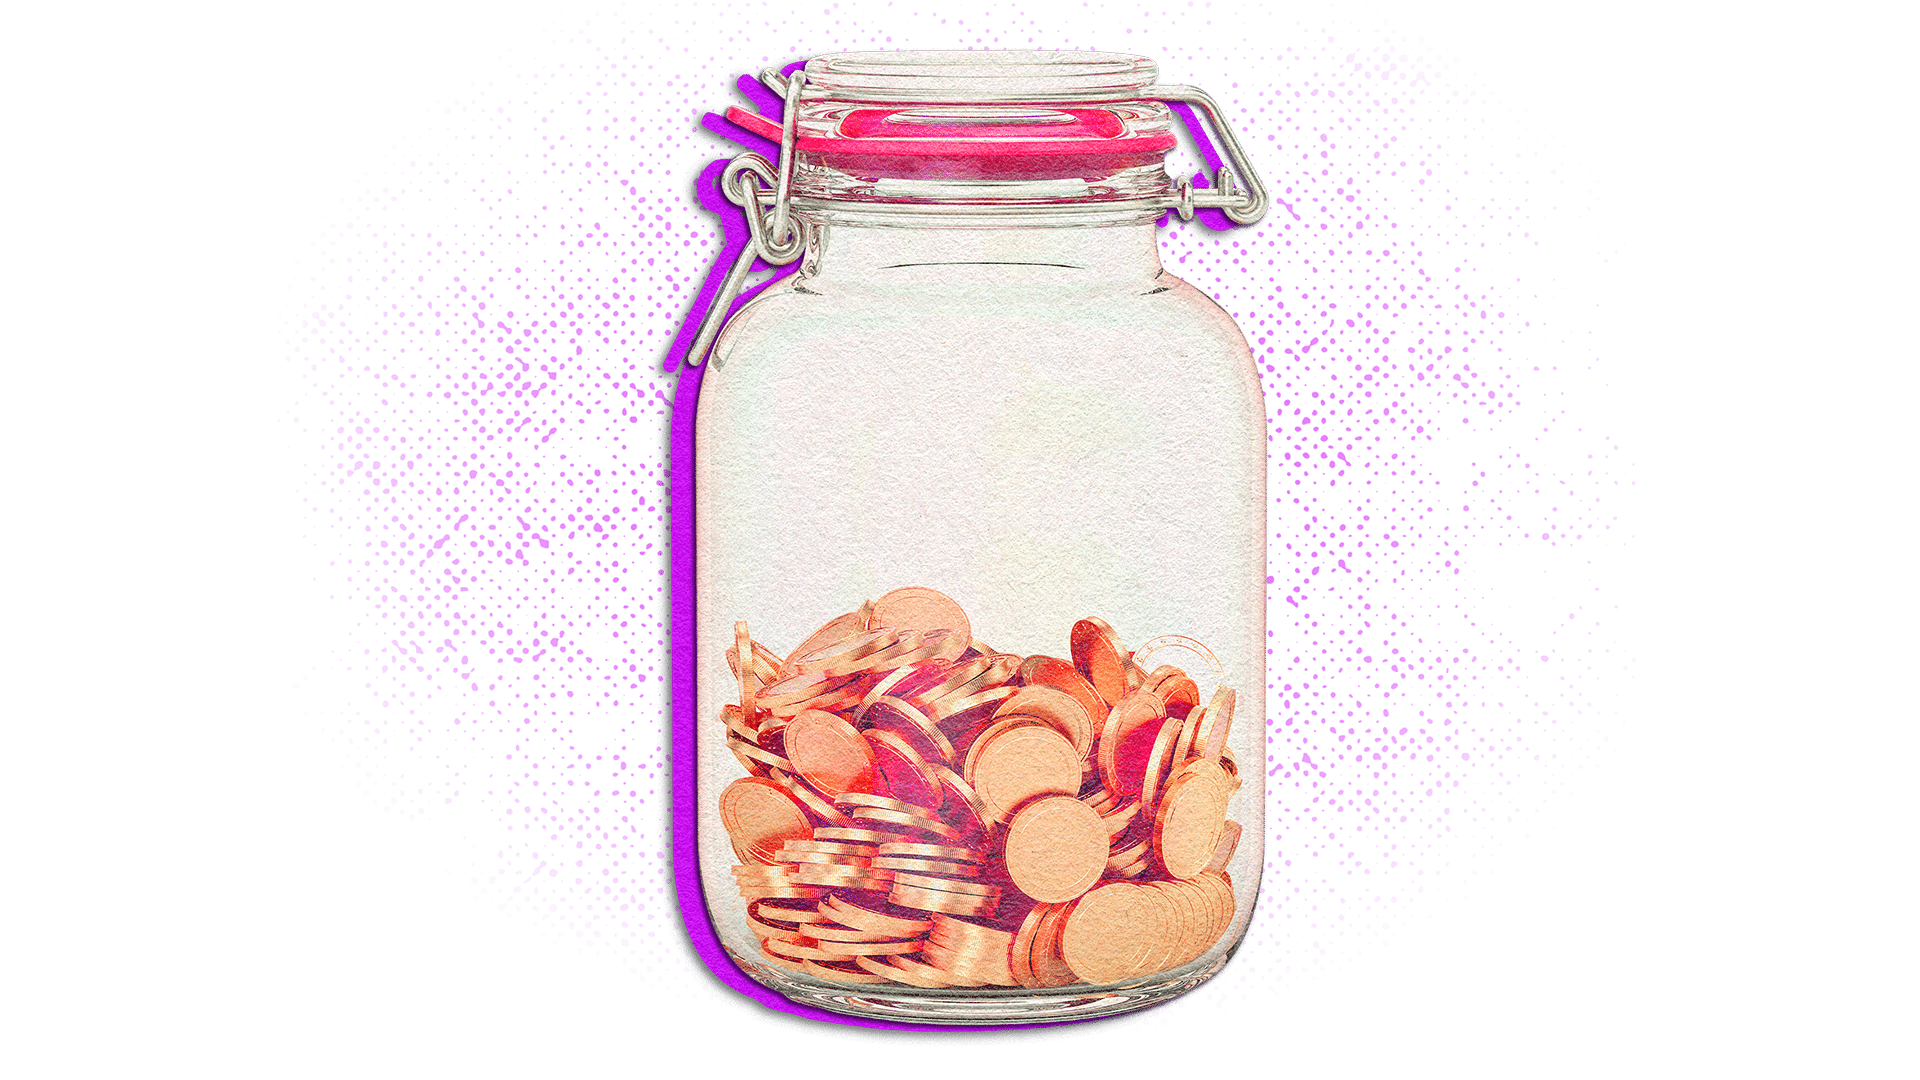 Graphic of a glass jar with gold coins inside.